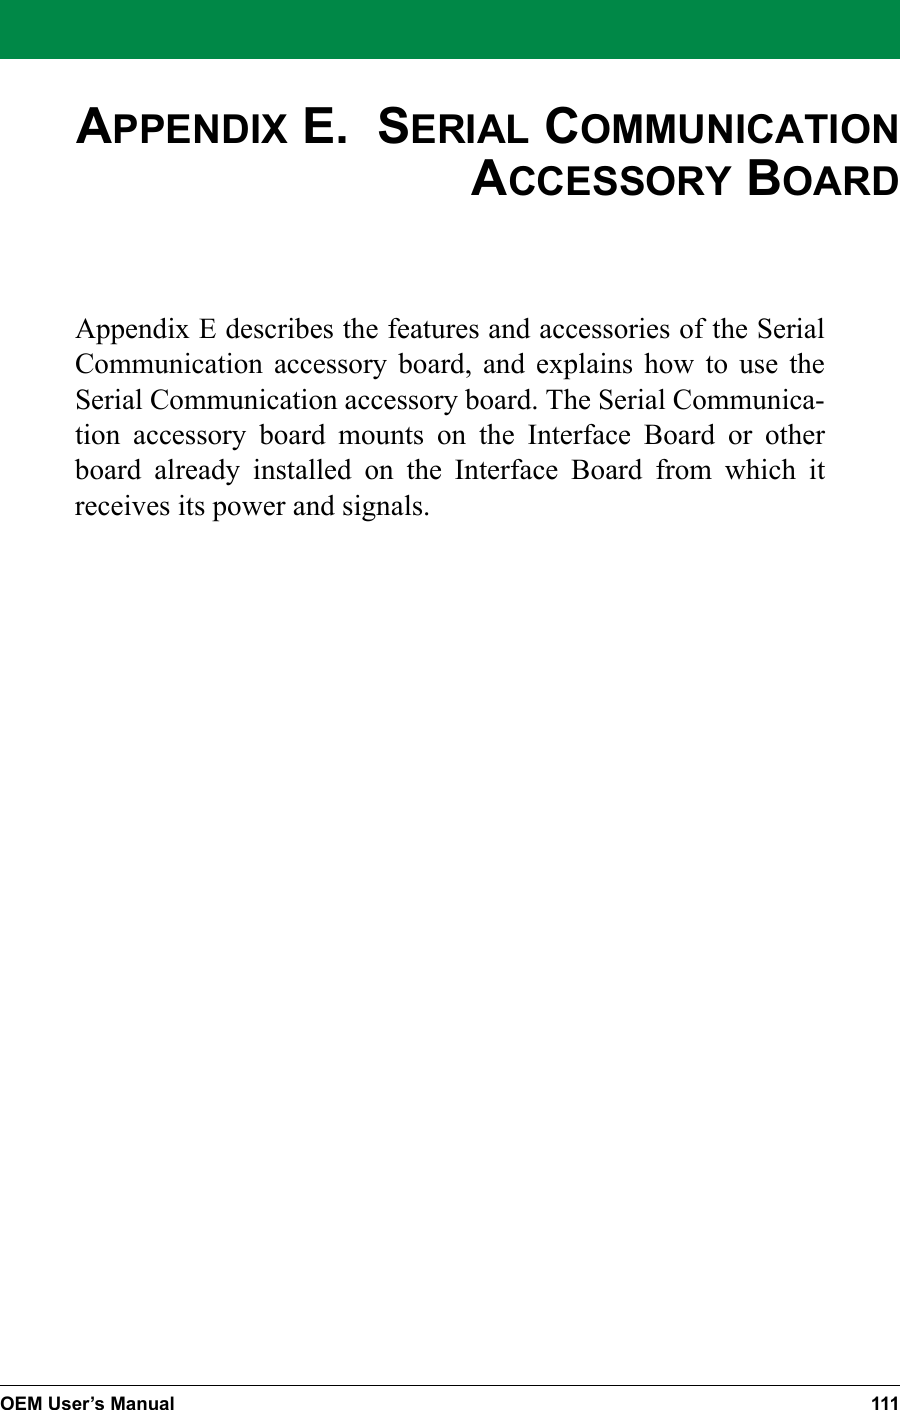 OEM User’s Manual 111APPENDIX E.  SERIAL COMMUNICATION ACCESSORY BOARDAppendix E describes the features and accessories of the Serial Communication accessory board, and explains how to use the Serial Communication accessory board. The Serial Communica-tion accessory board mounts on the Interface Board or other board already installed on the Interface Board from which it receives its power and signals.